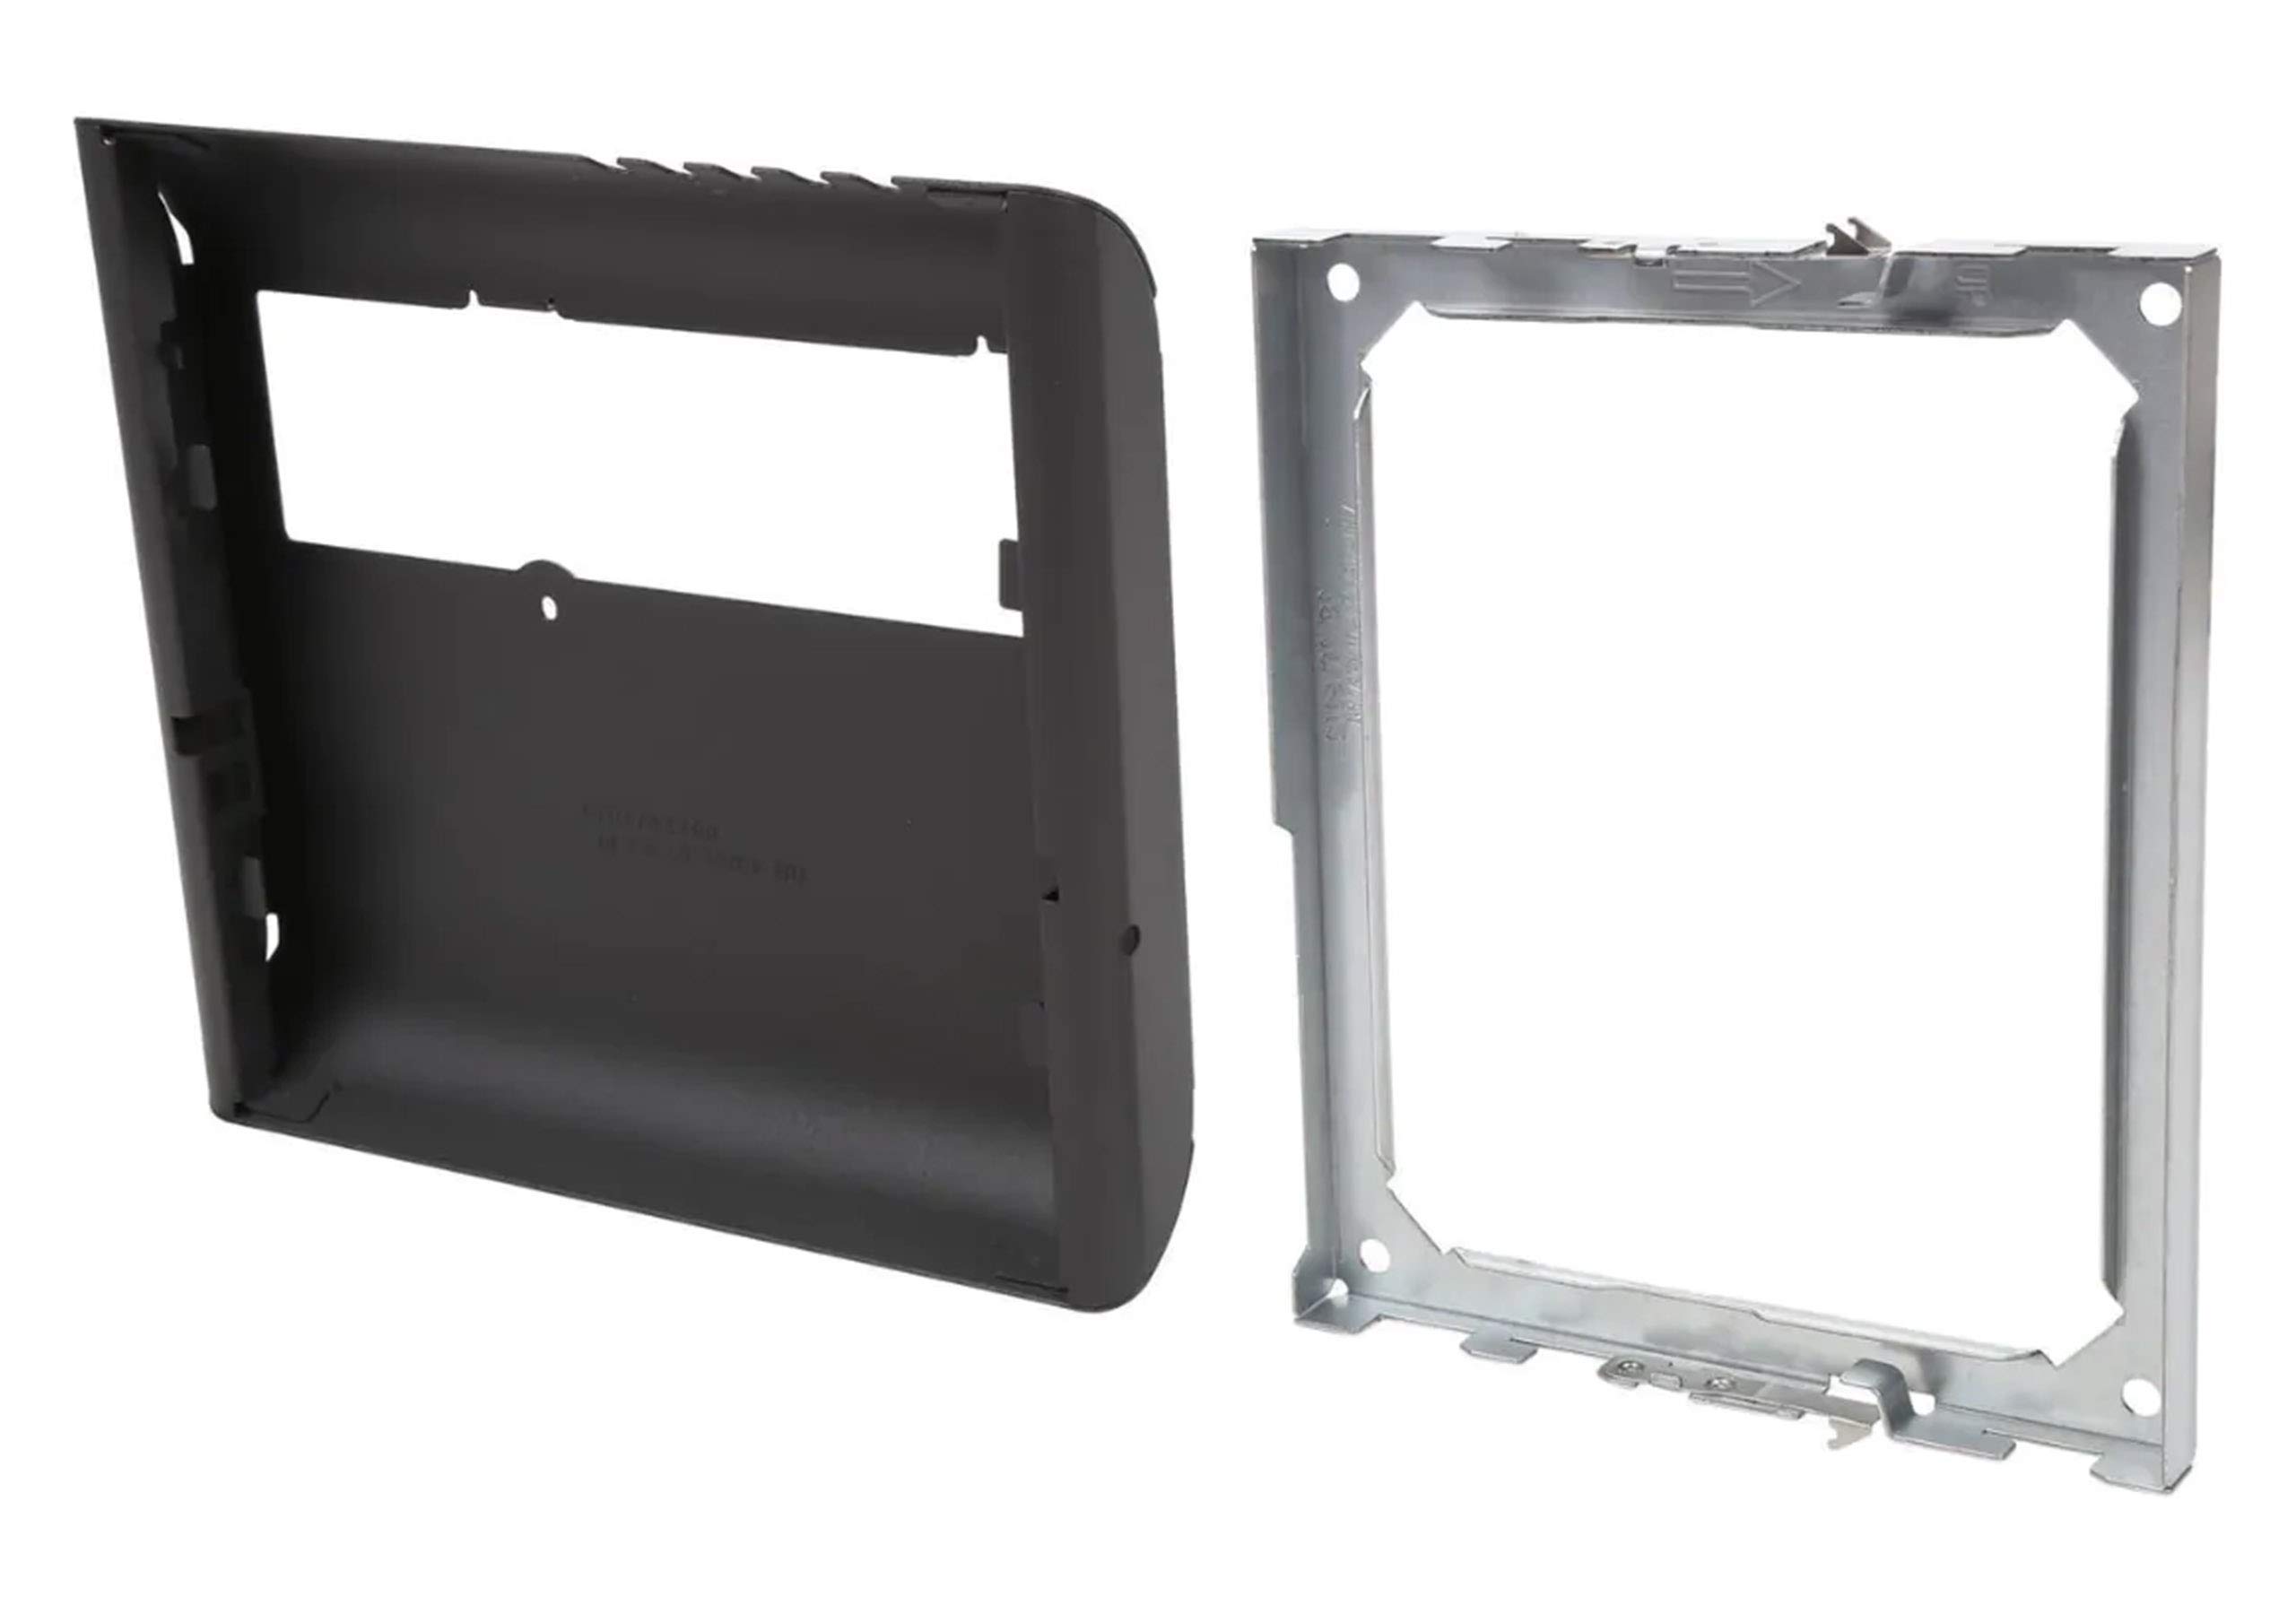 WALL MOUNT KIT FOR CISCO